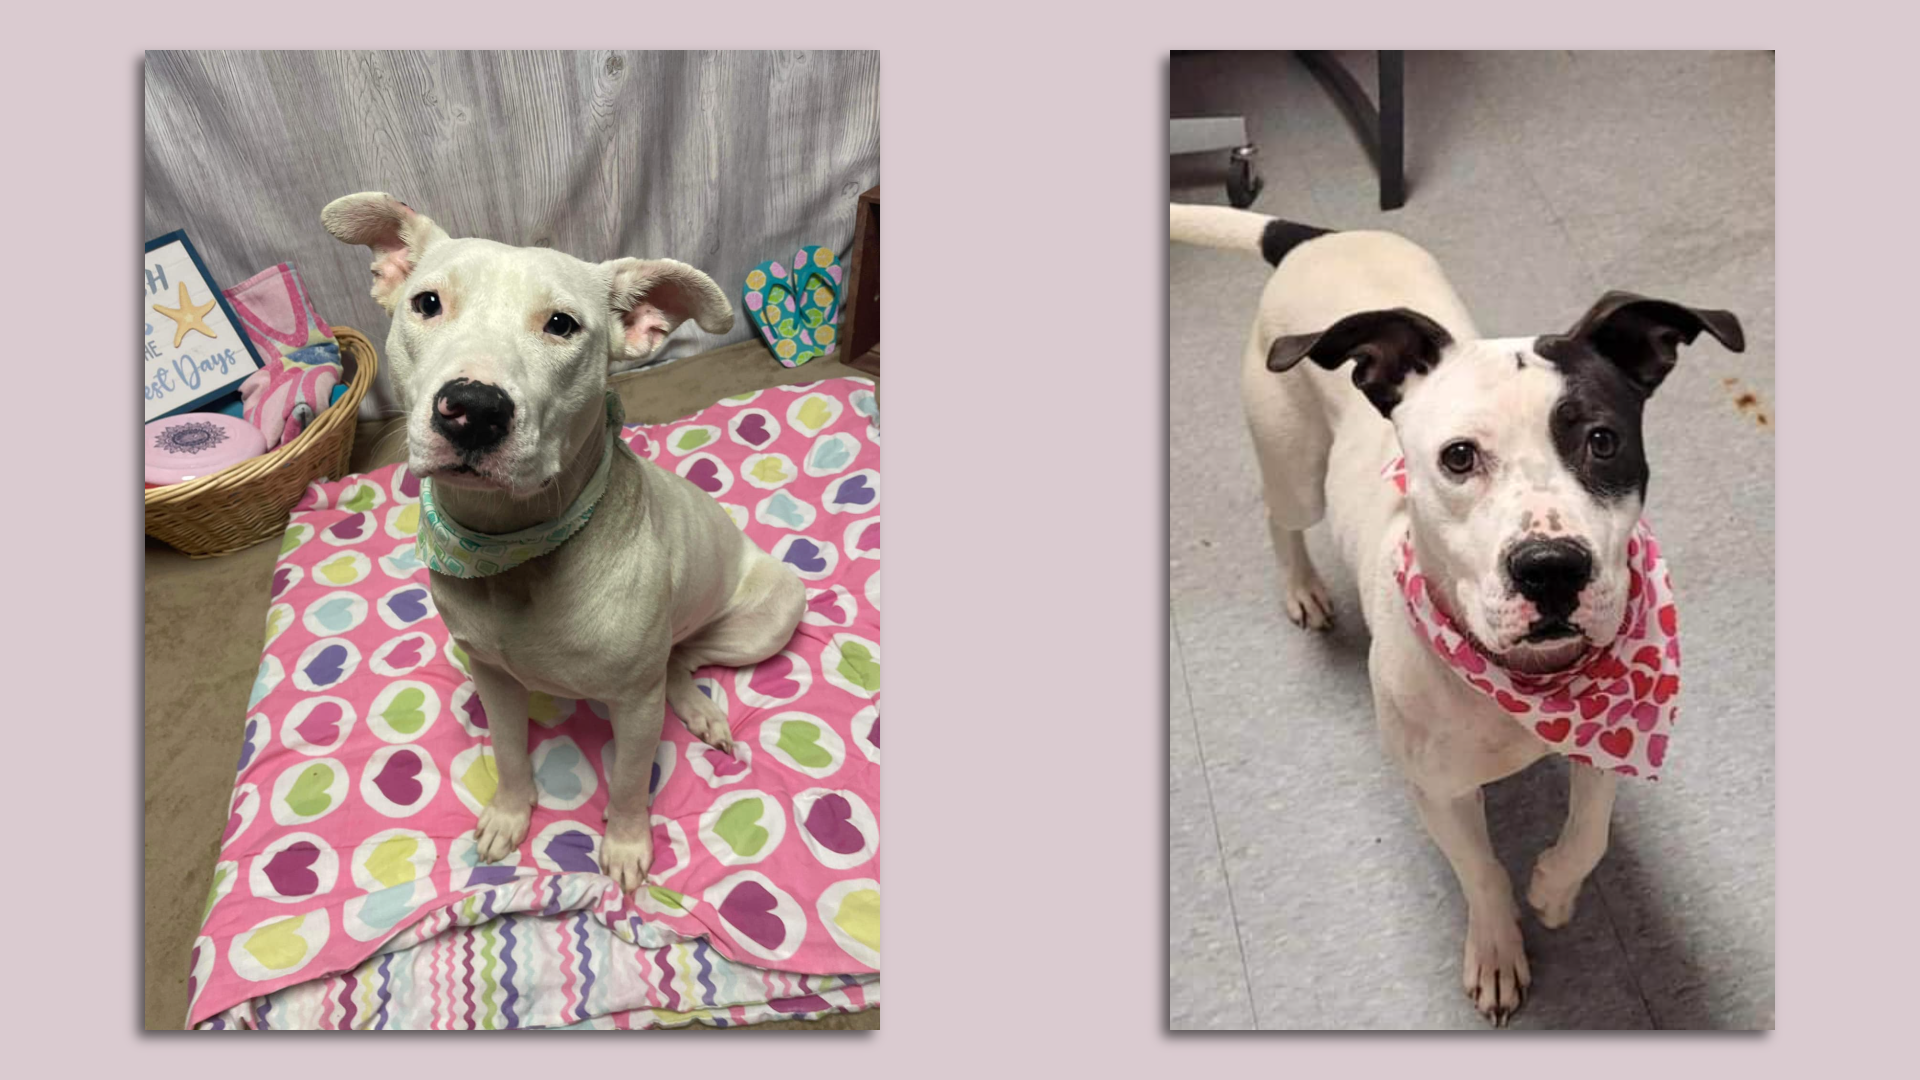 lso adoptable at the city's shelter: Li Mei, No. A149555, around 3 years old (left) and Avila/Oreo, No. A145753, around 2.5 years old. 